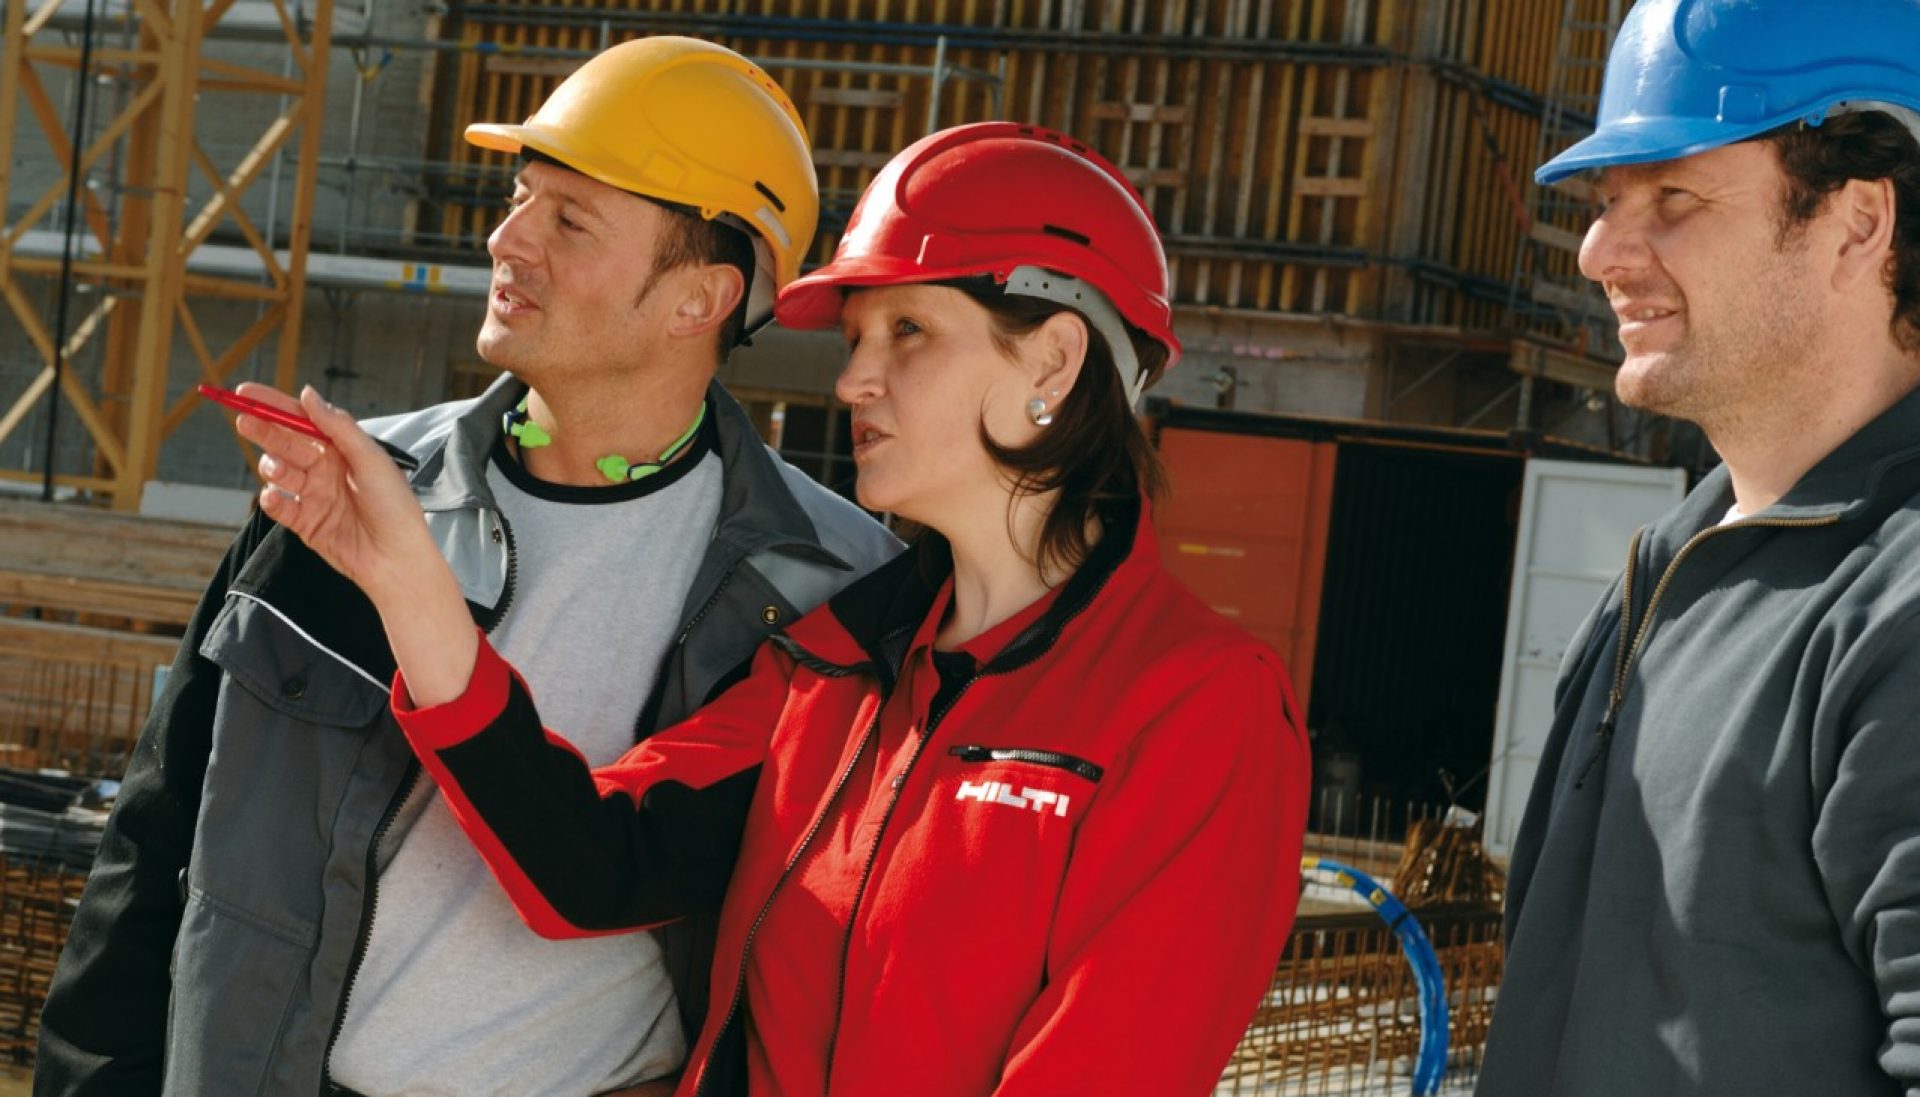 Hilti technical services on the phone